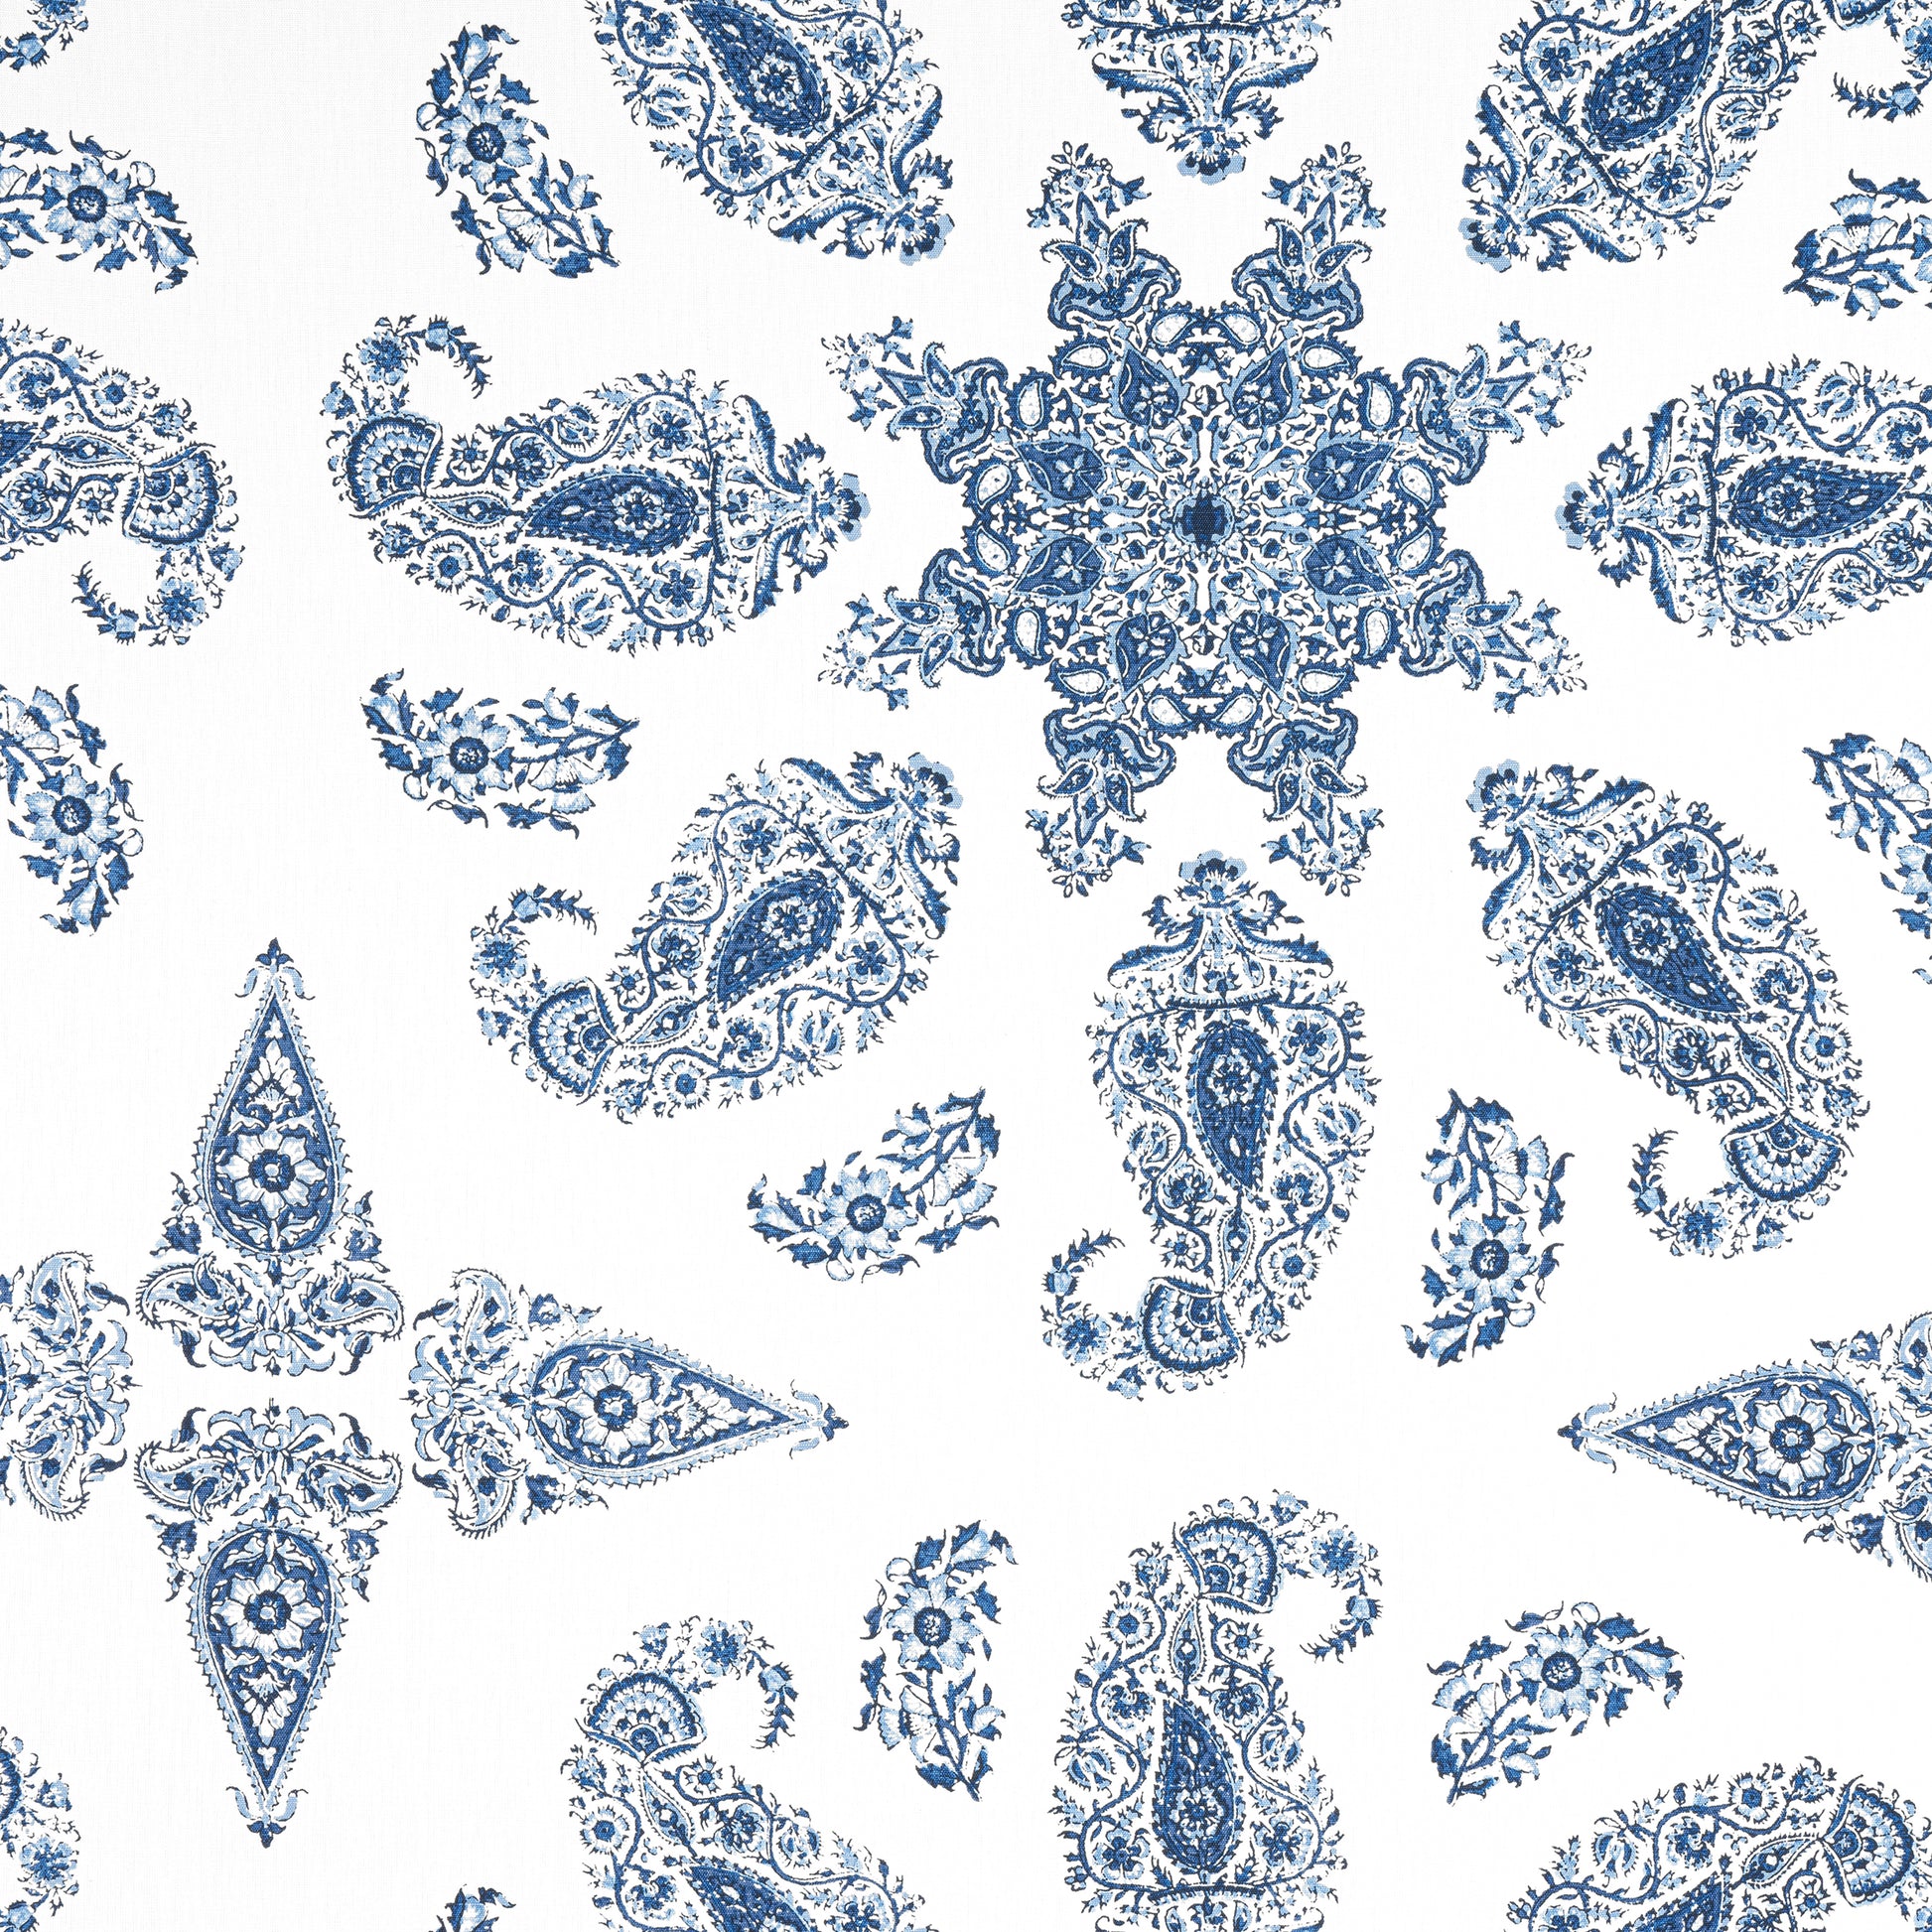 Purchase Thibaut Fabric Item# F936429 pattern name East India color Blue and White